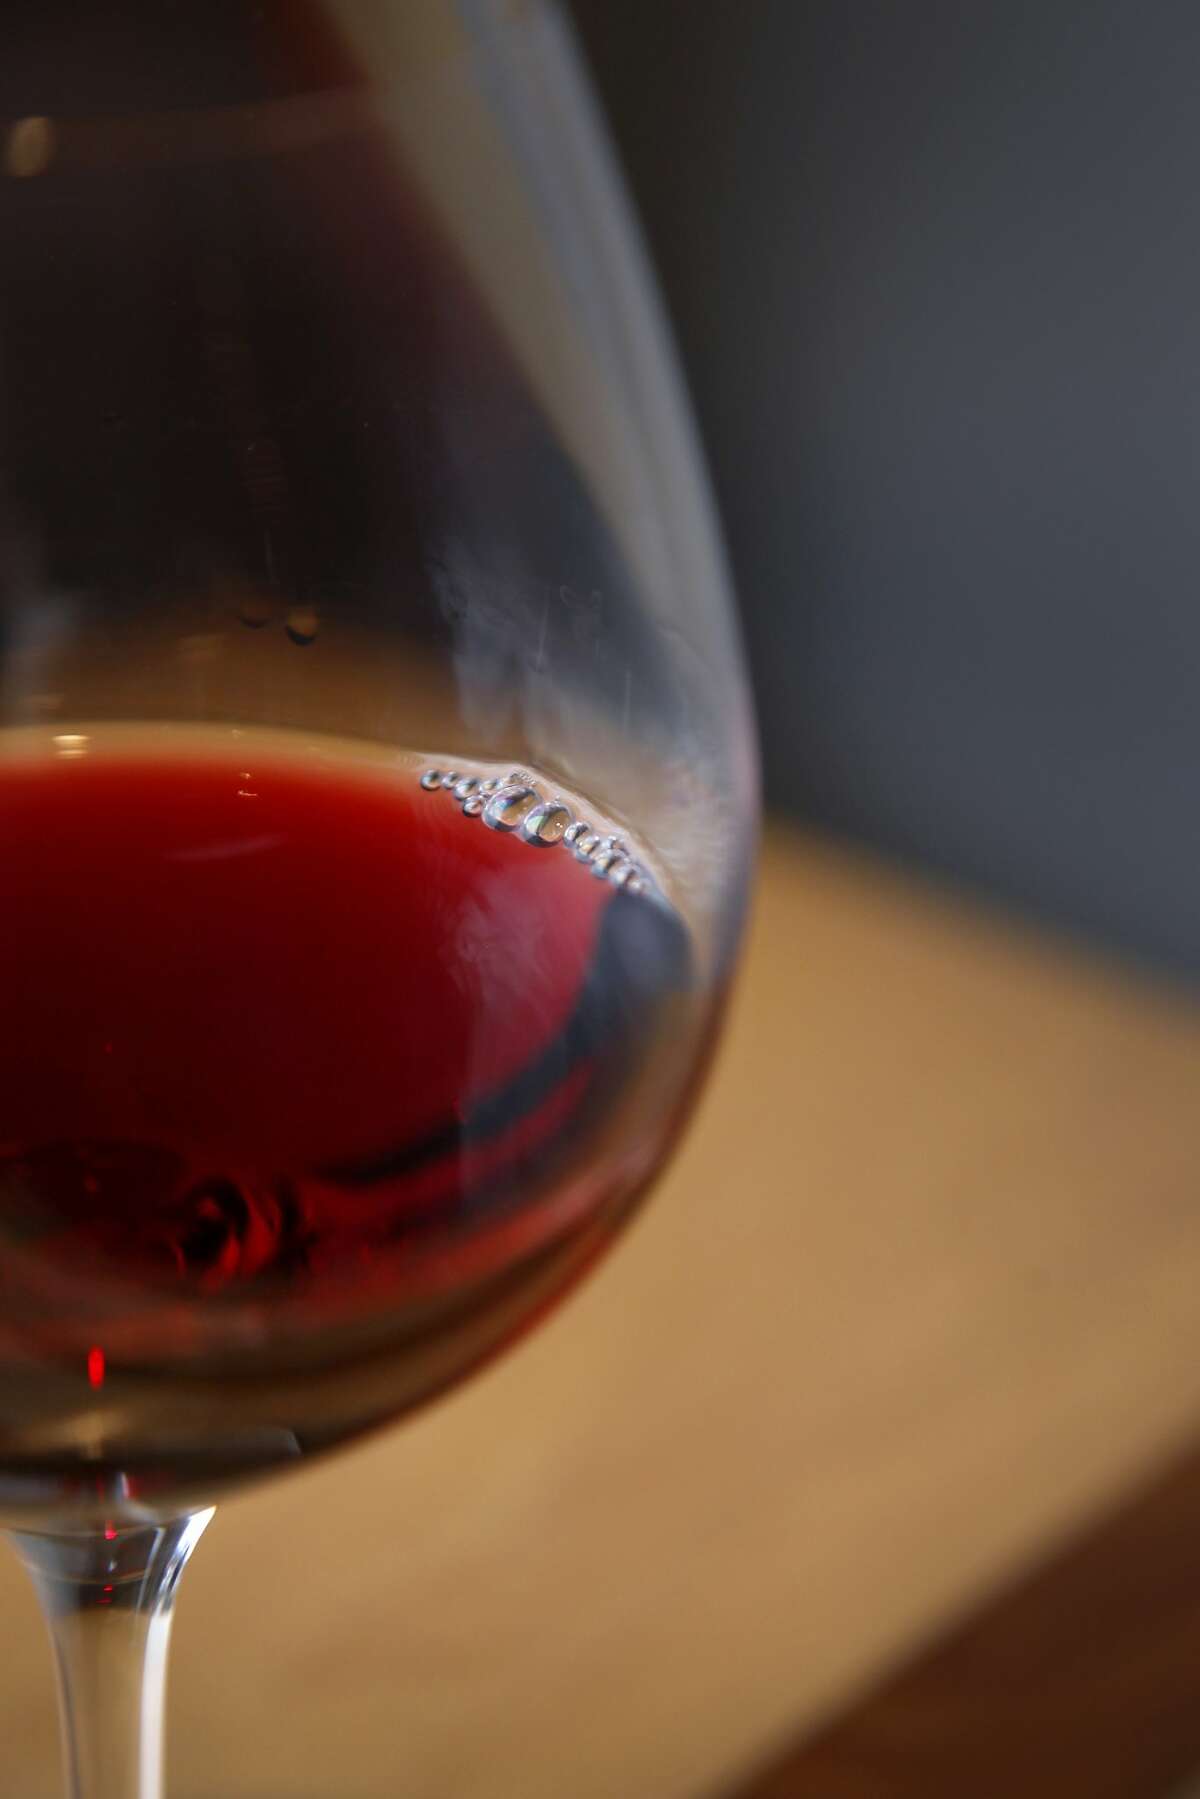 A glass of pinot at Cartograph Wines tasting room in Healdsburg, Calif., on Saturday, January 2, 2015.